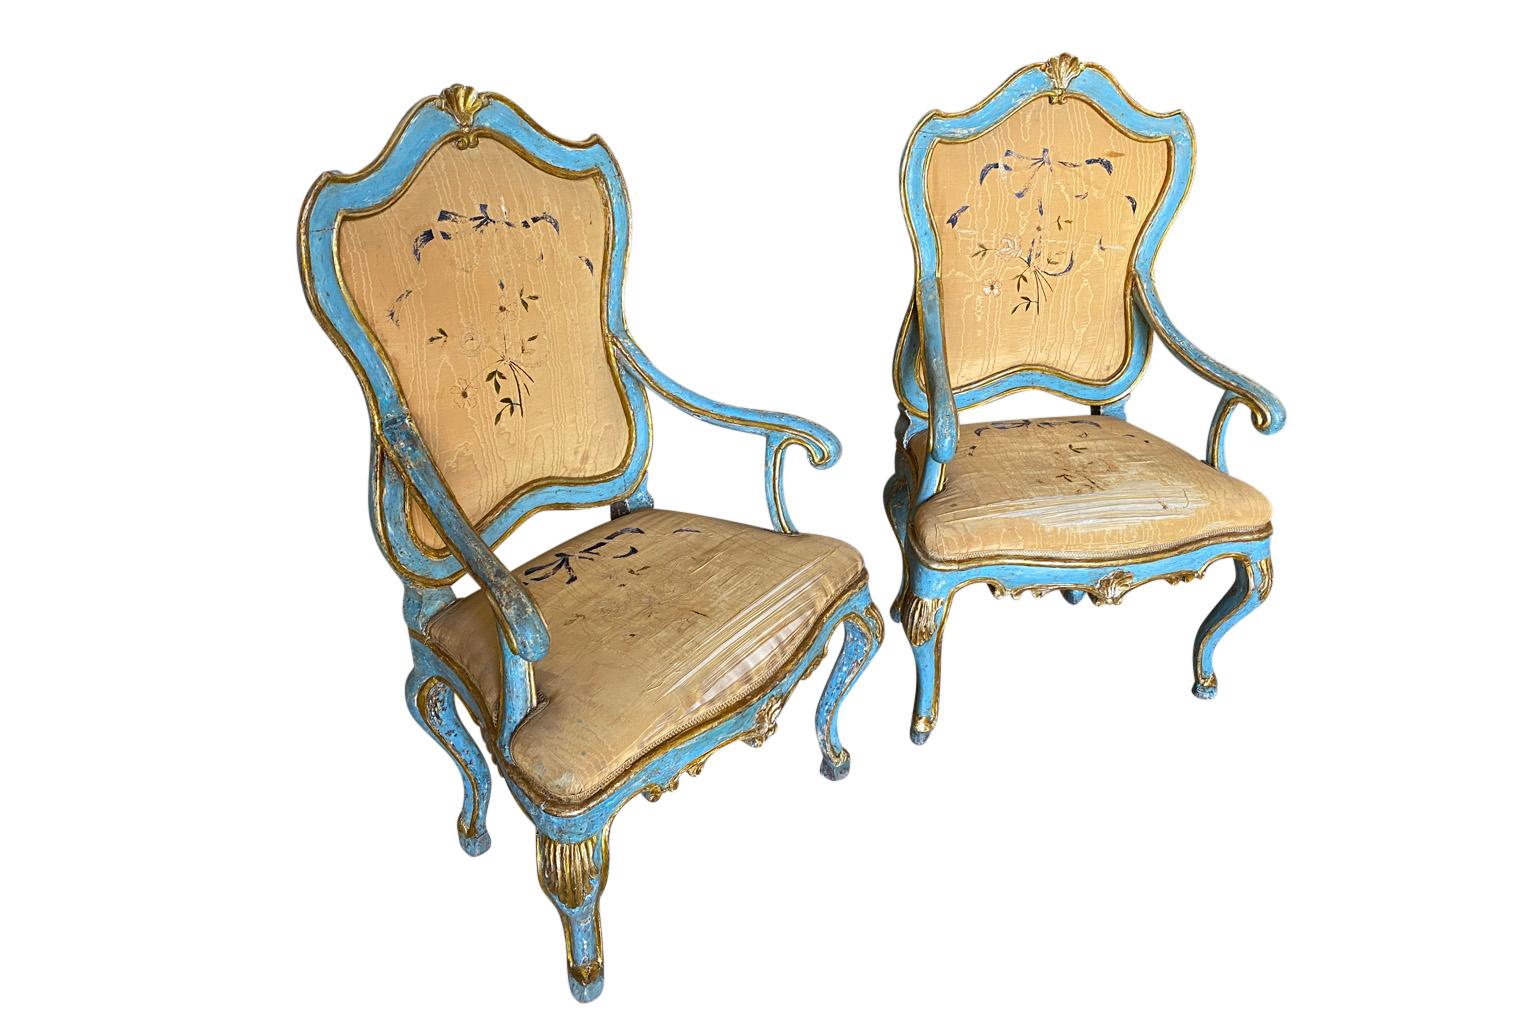 An outstanding and very elegant pair of Regence period Venetian Fauteuils - armchairs. Beautifully constructed from painted and gilt wood with stunning color and original silk upholstery. Gorgeous accent chairs.